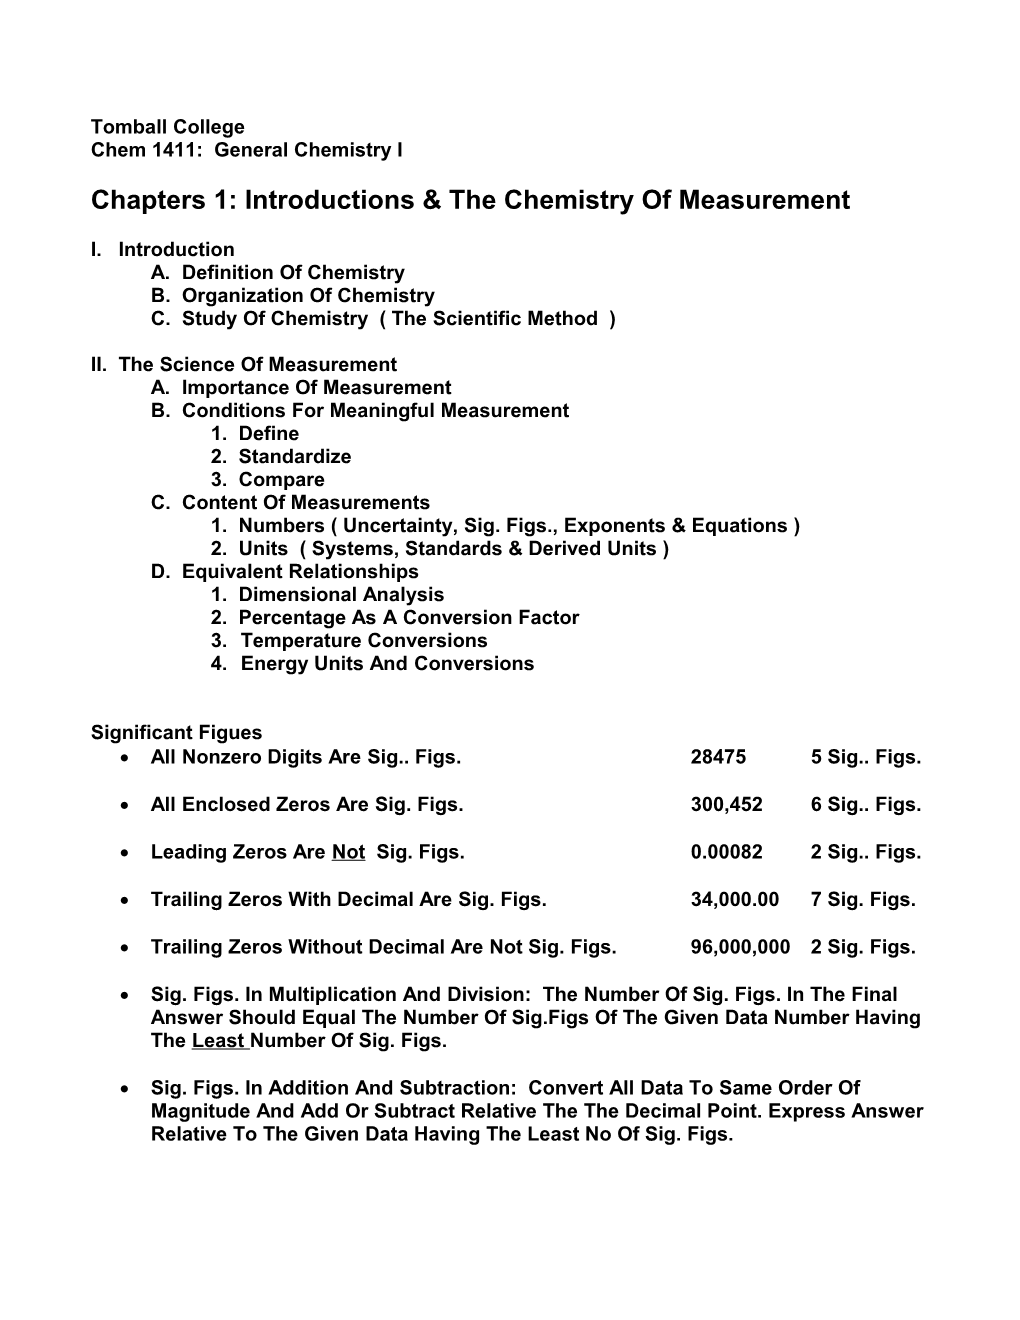 Chapters 1: Introductions & the Chemistry of Measurement